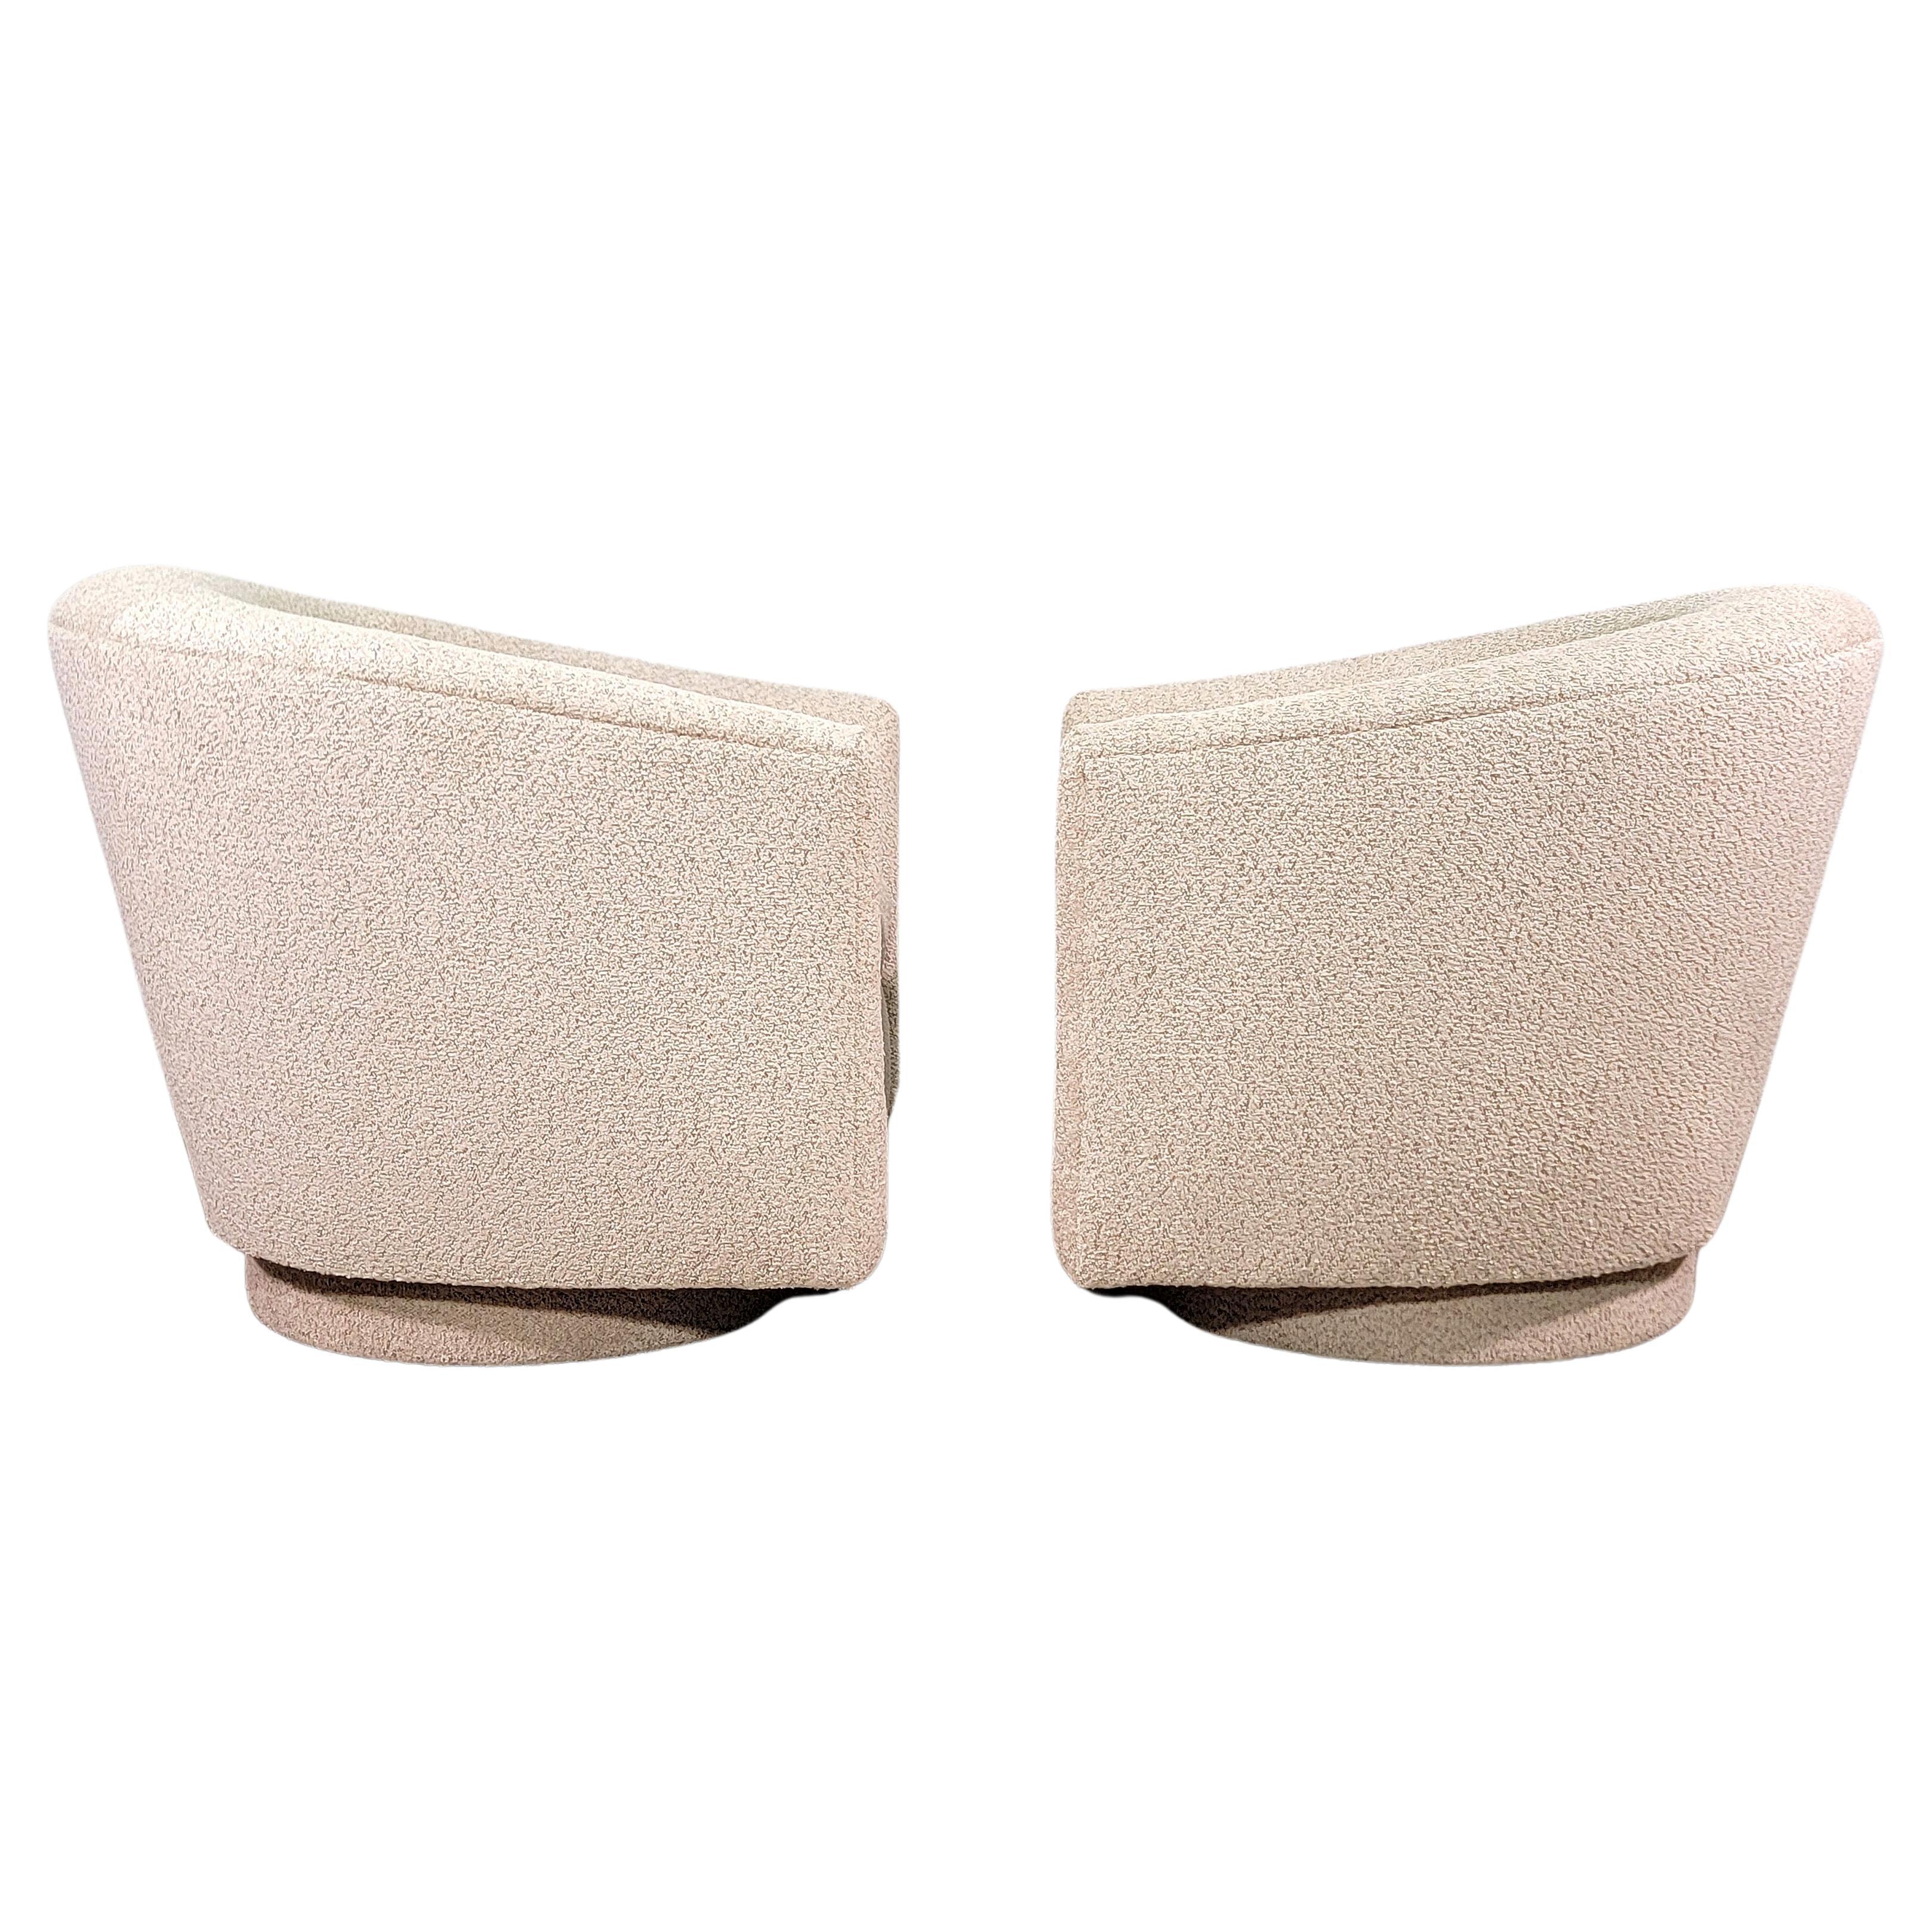 Set of swivel chairs in the style of Milo Baughman for Thayer Coggin, circa 1970-1979. Completely reupholstered in a neutral and luxurious creamy taupe beige nubby boucle.

Other designers of the period include Vladimir Kagan, T.H.